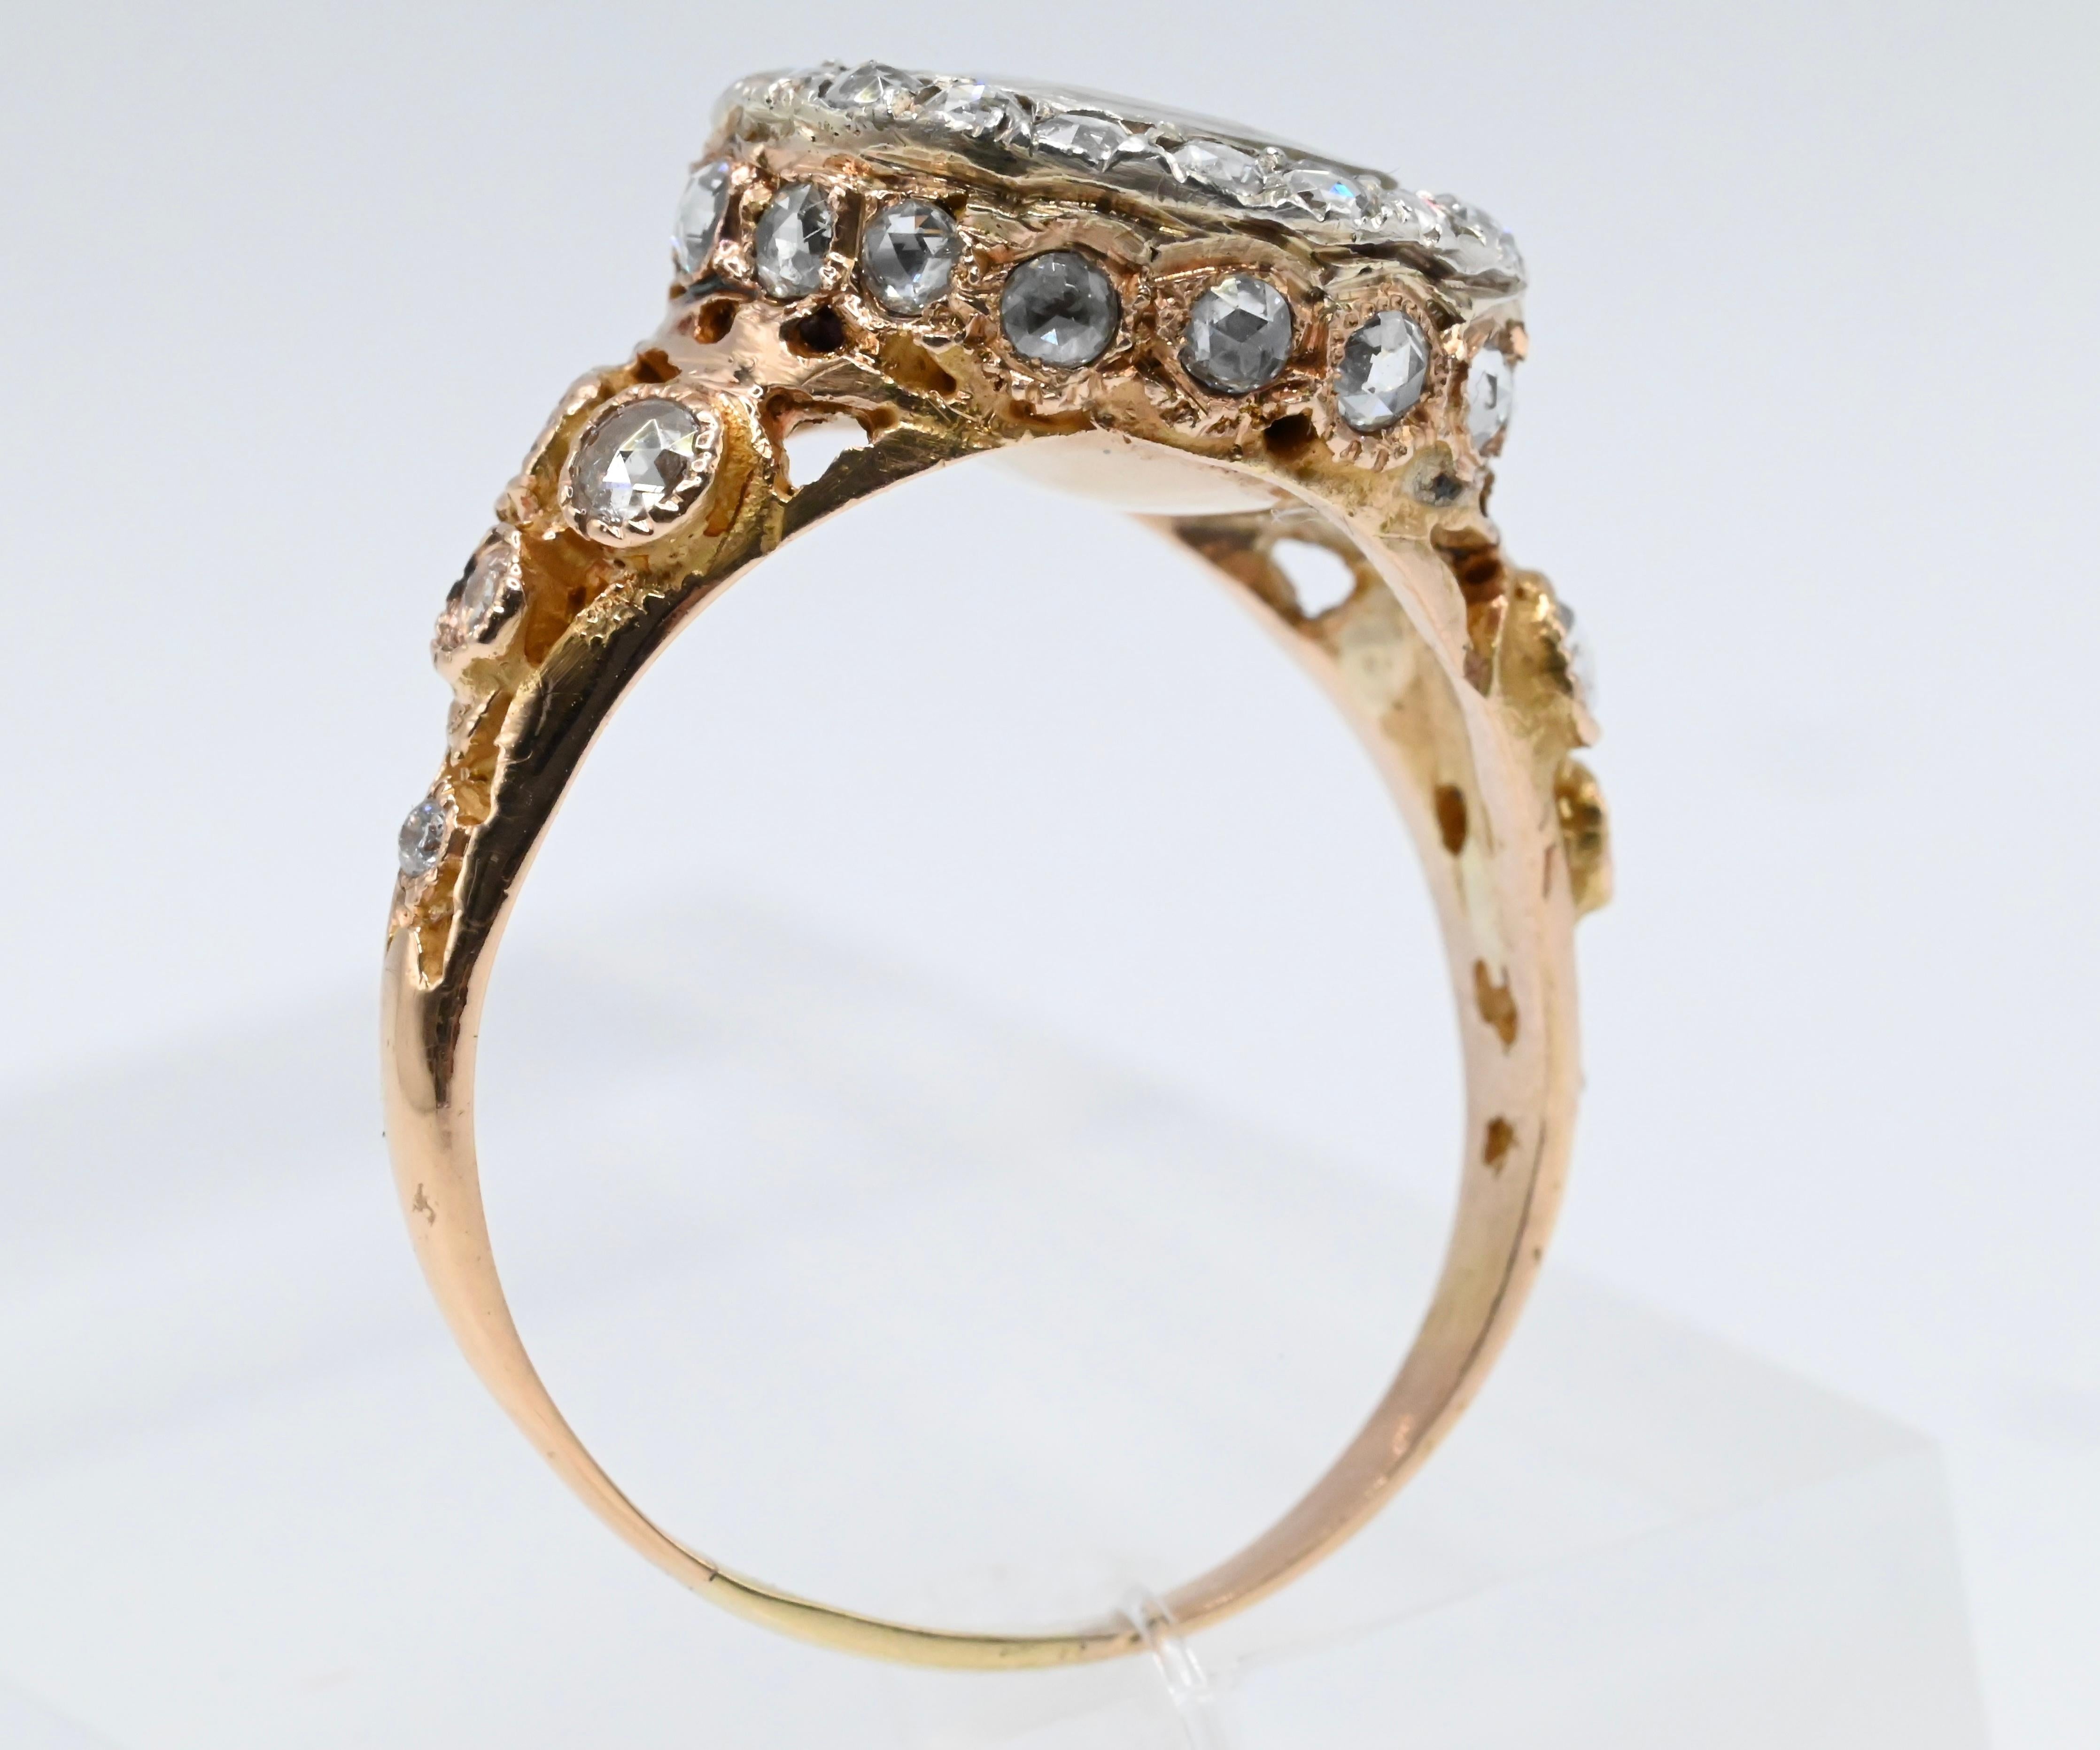 Rose Cut Exceptional 1880s Antique Diamond Ring over 3 Carats of Diamonds Rare